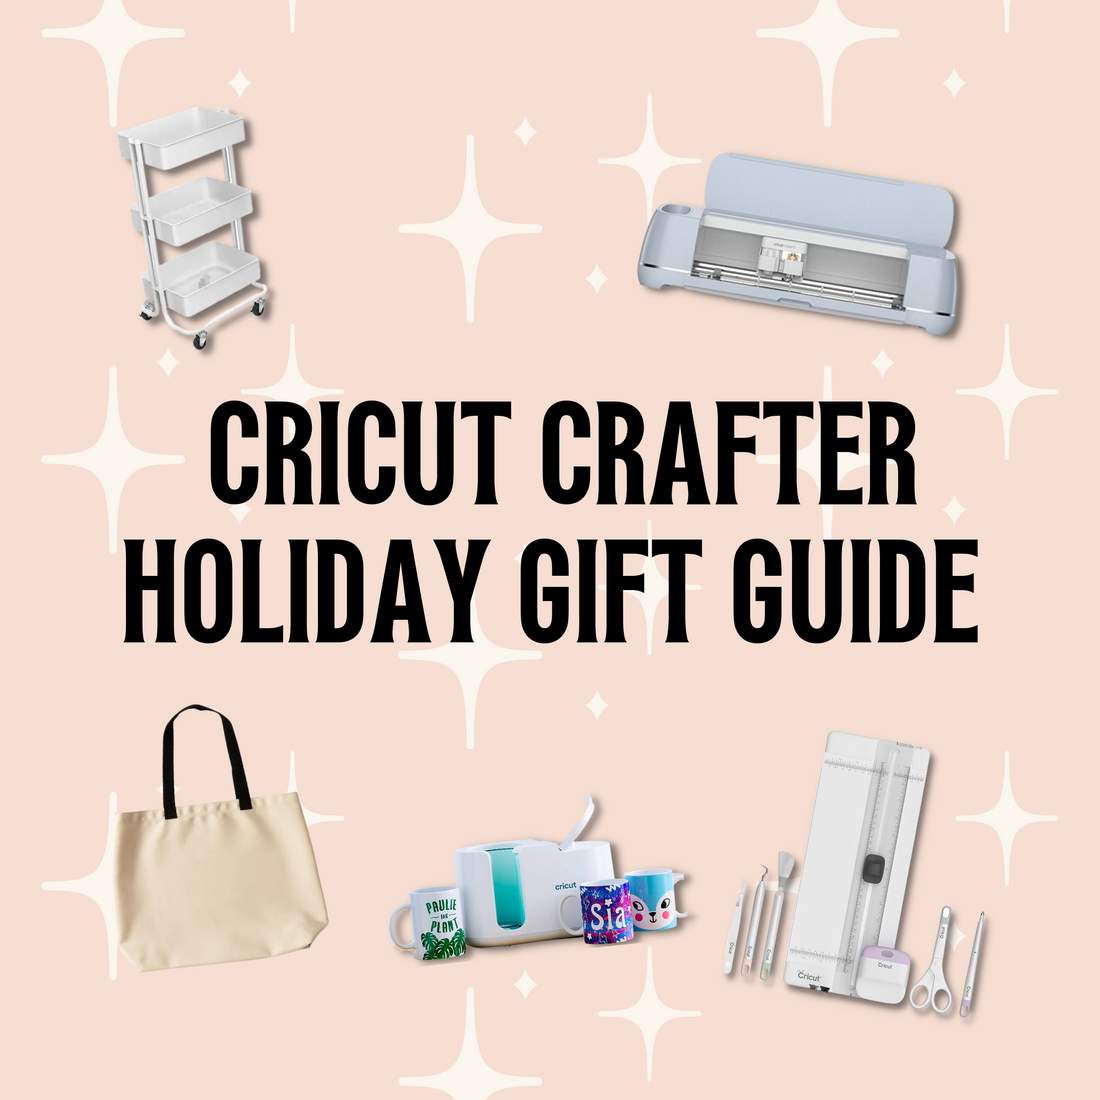 Cricut Crafter Holiday Gift Guide